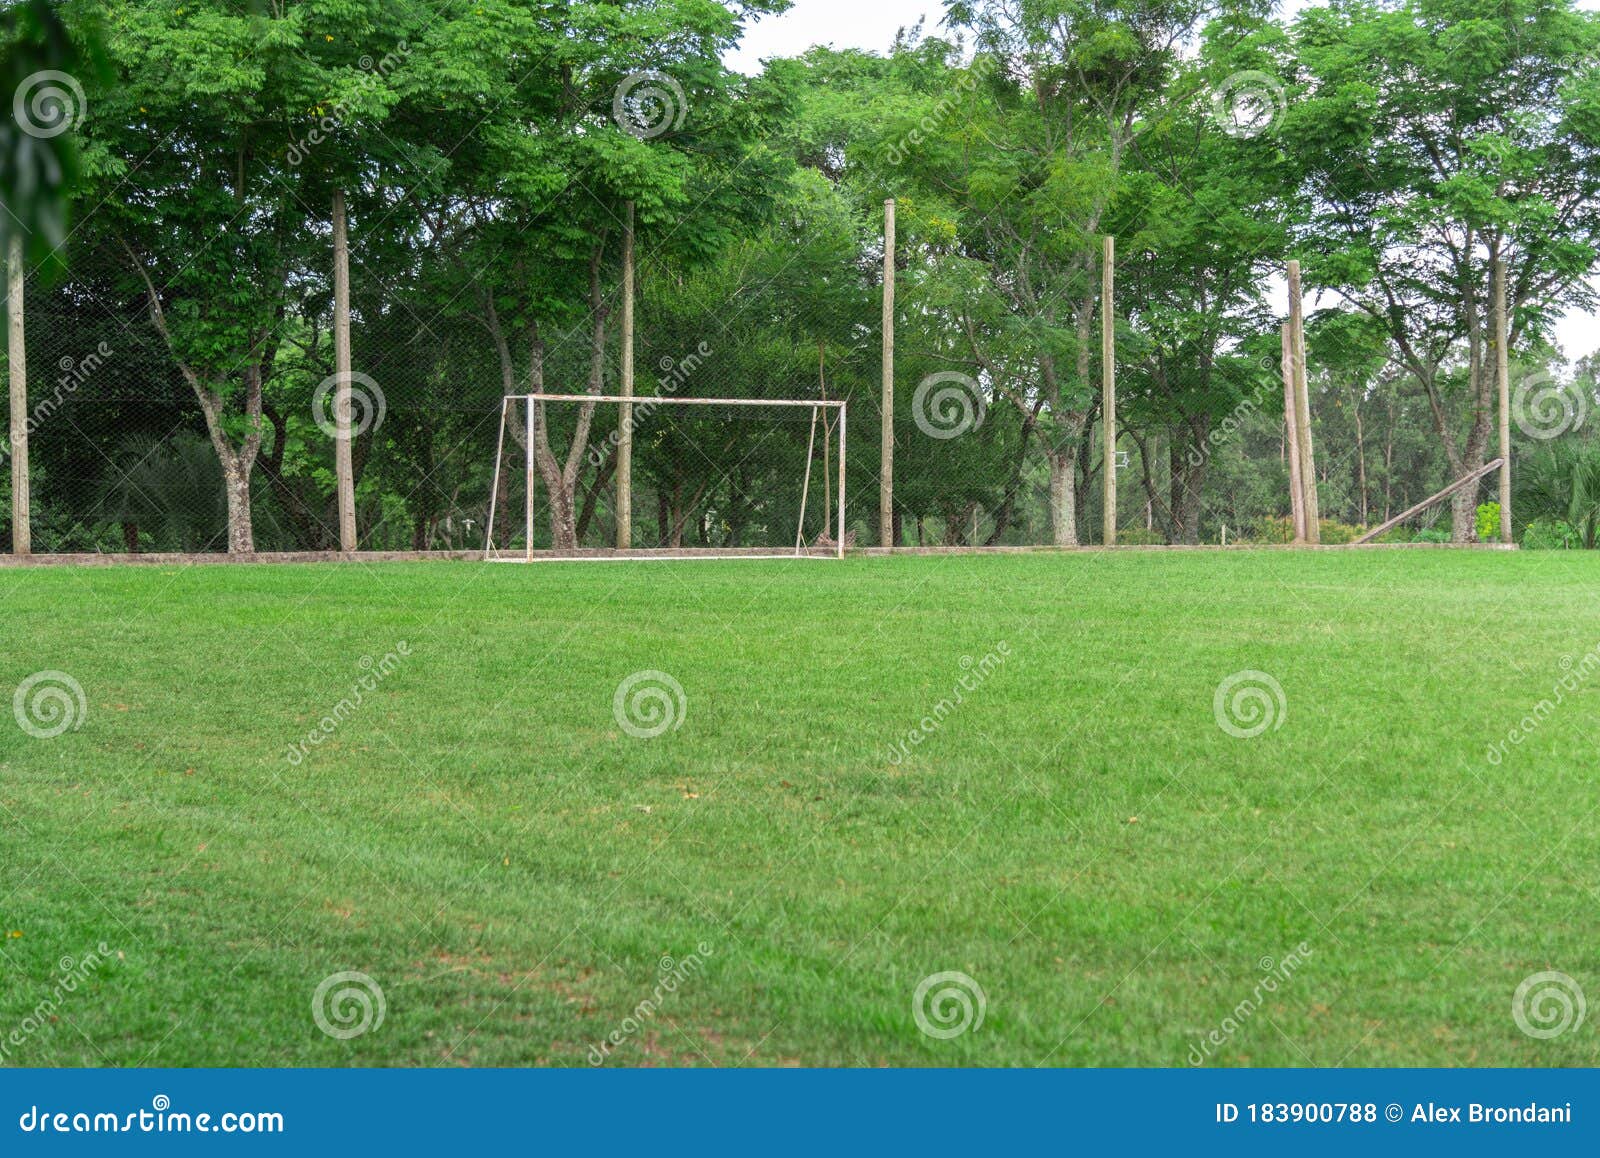 soccer practice field in a club in southern brazil and the goalkeeper`s post